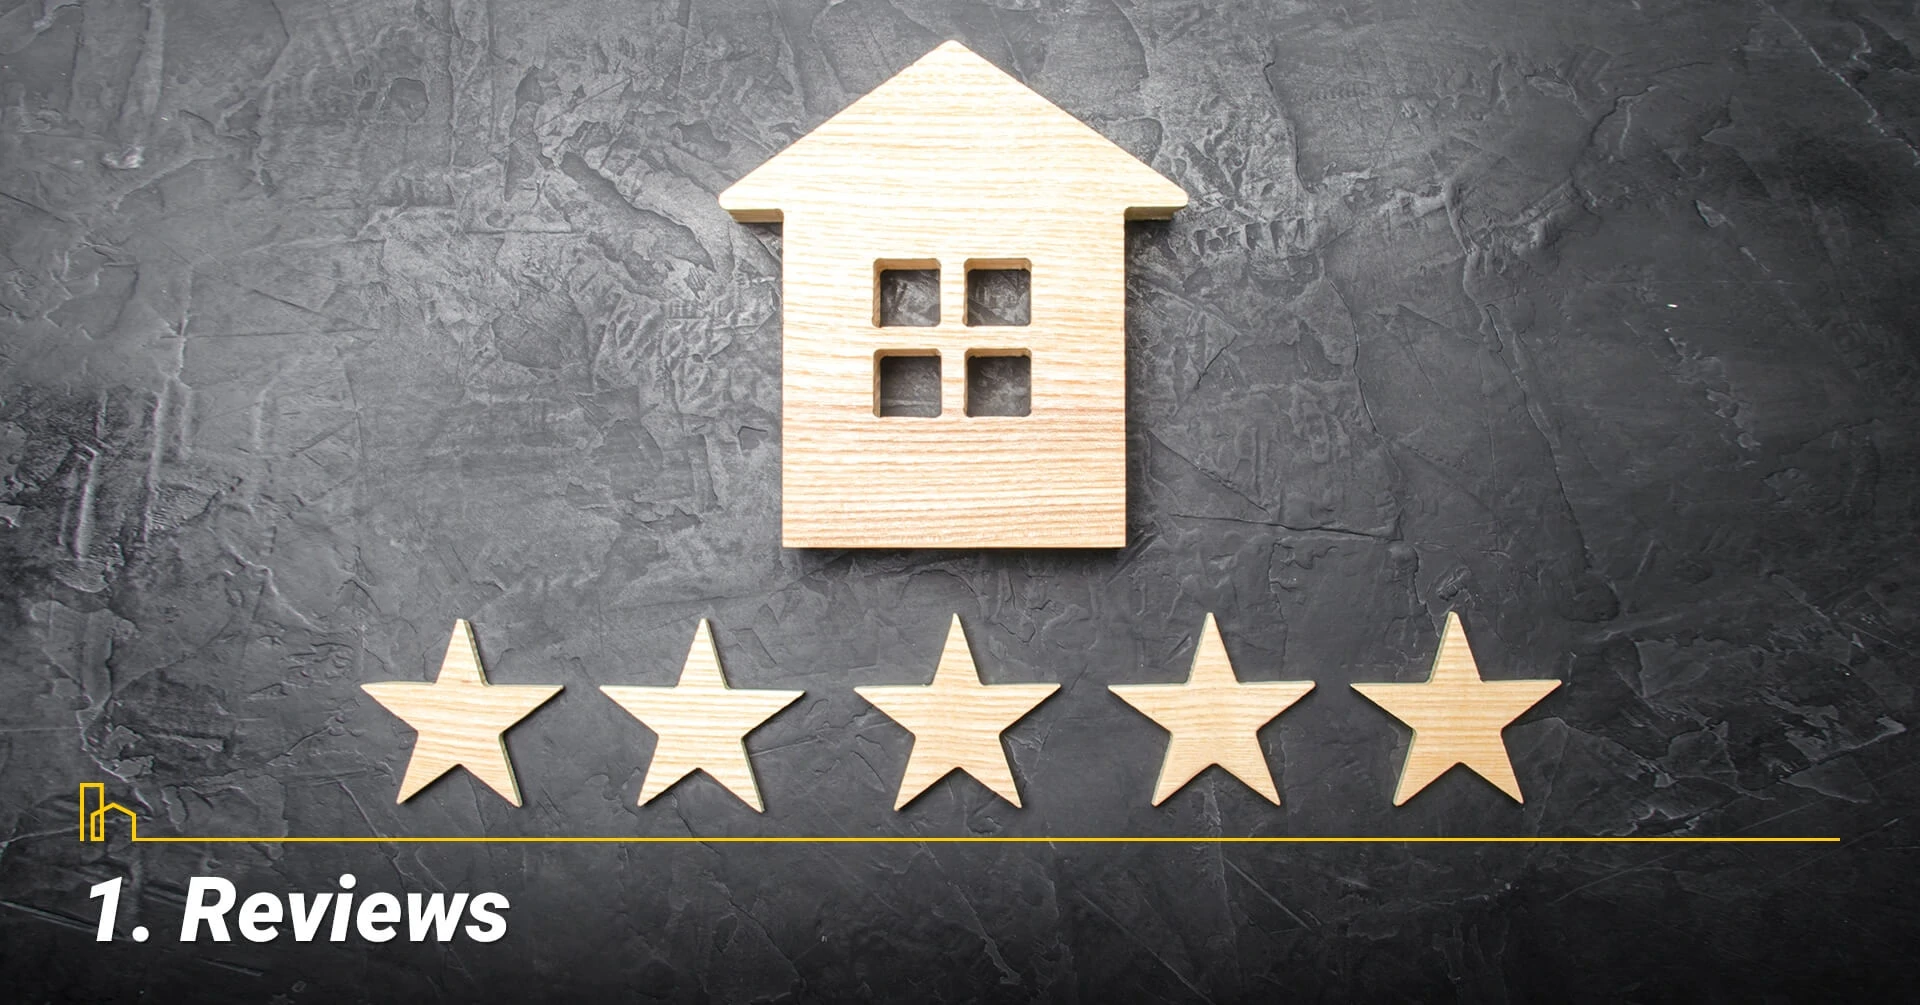 Reviews, what pass clients say about this agent